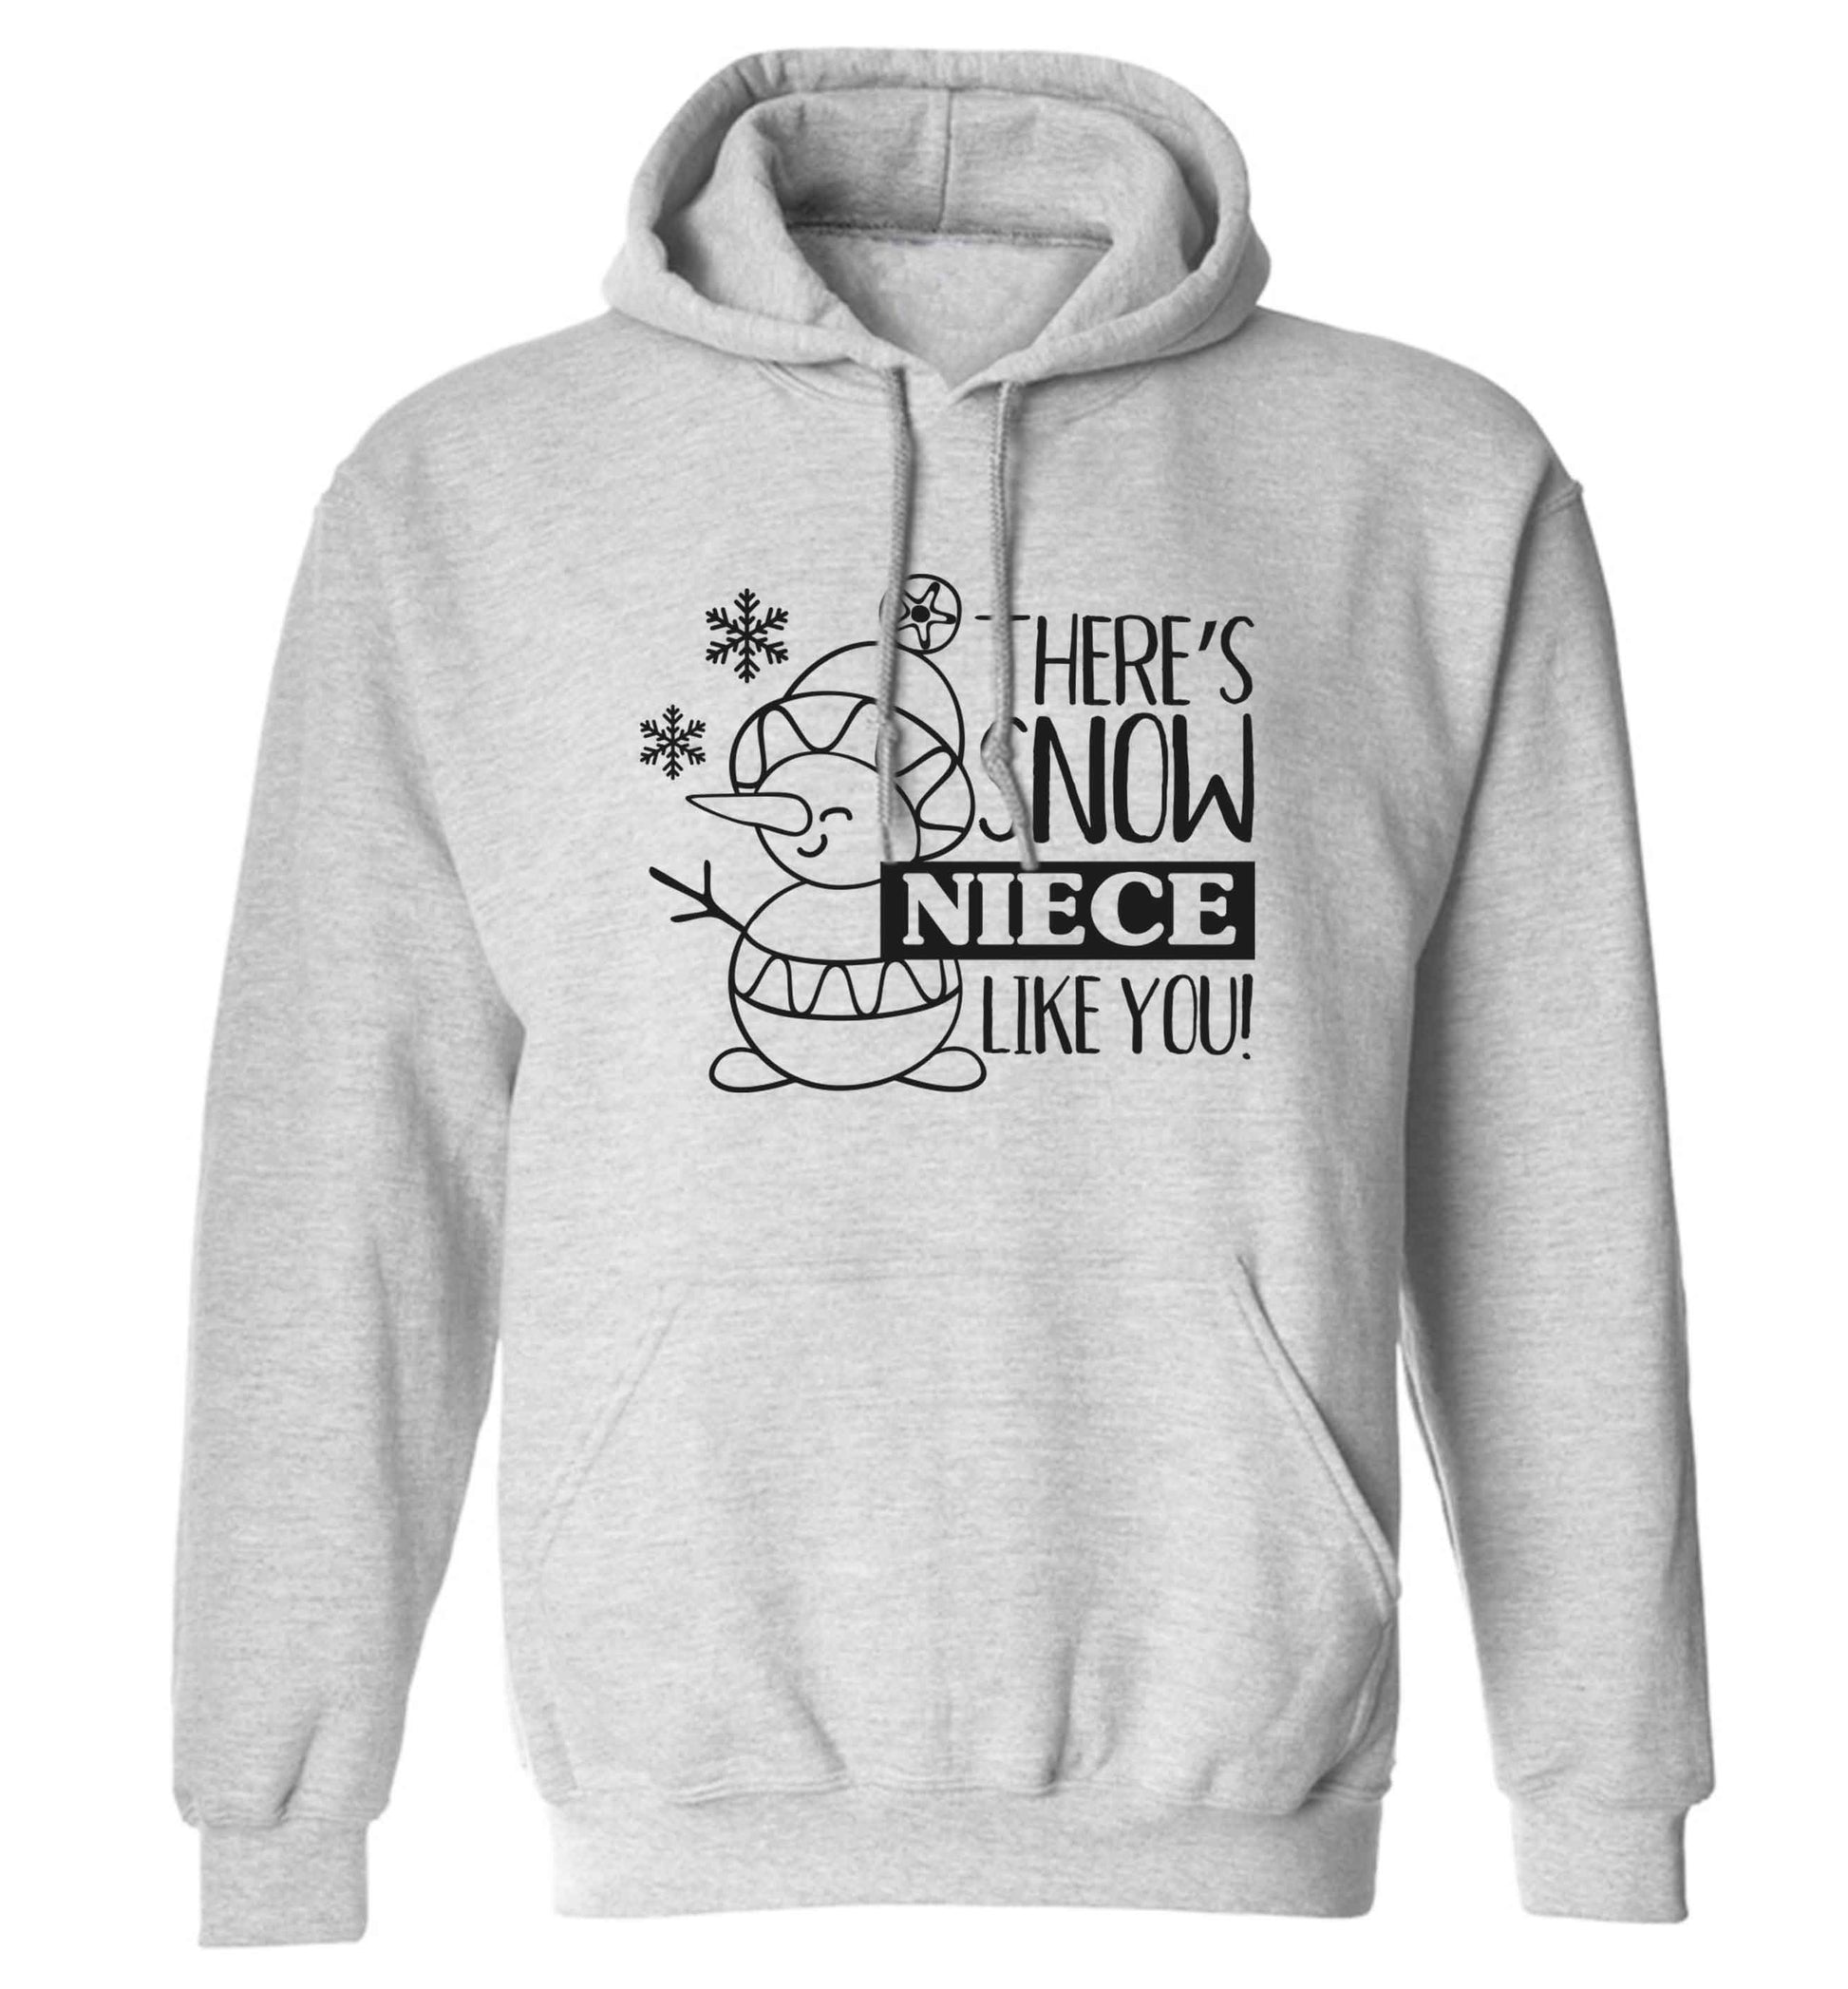 There's snow niece like you adults unisex grey hoodie 2XL